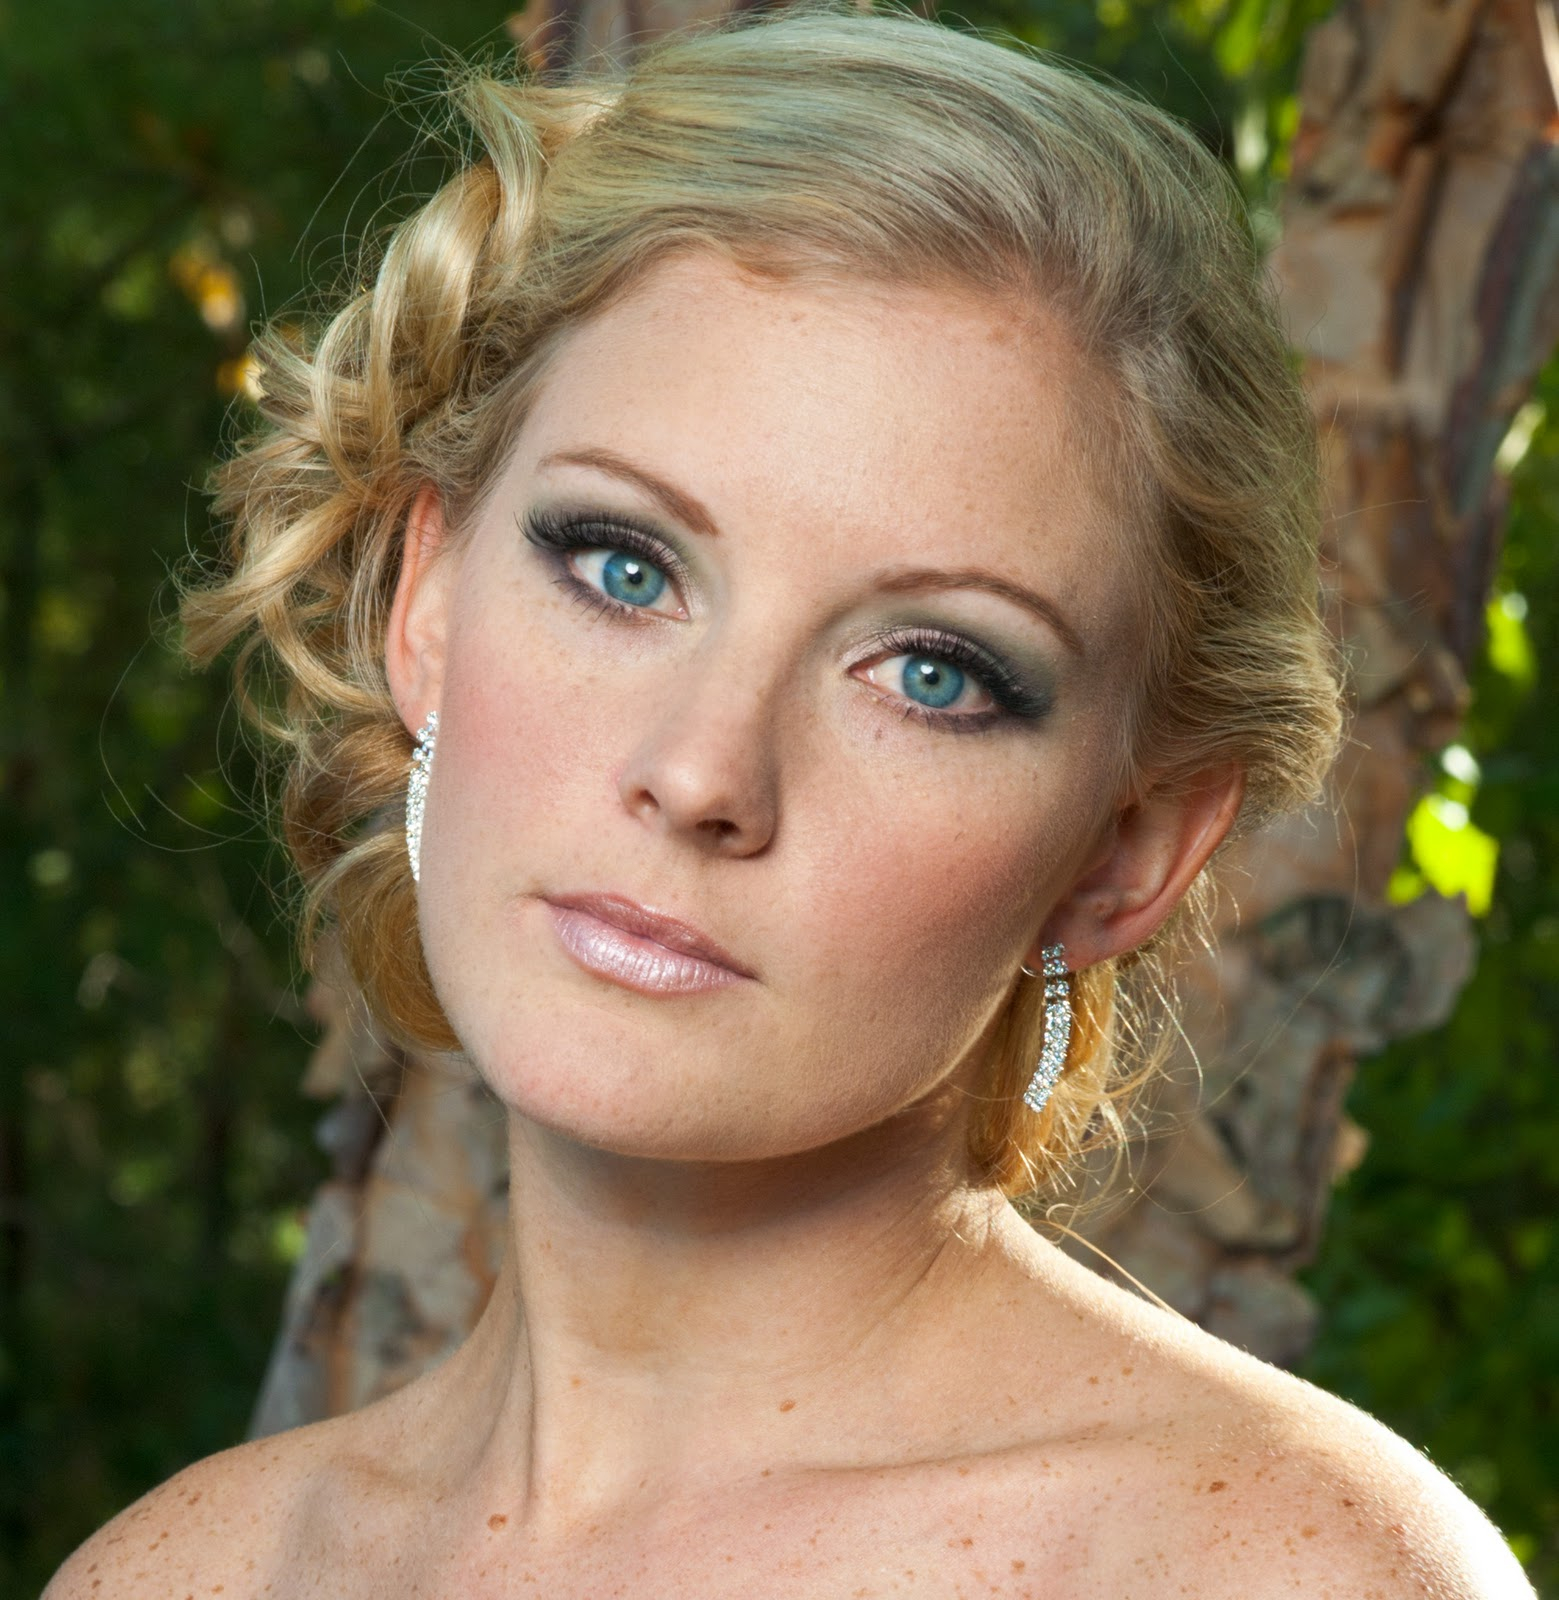 Wedding Makeup For Brown Eyes Wedding Makeup Tips For Blue Eyed Brides With Blond Hair Bride Sparkle